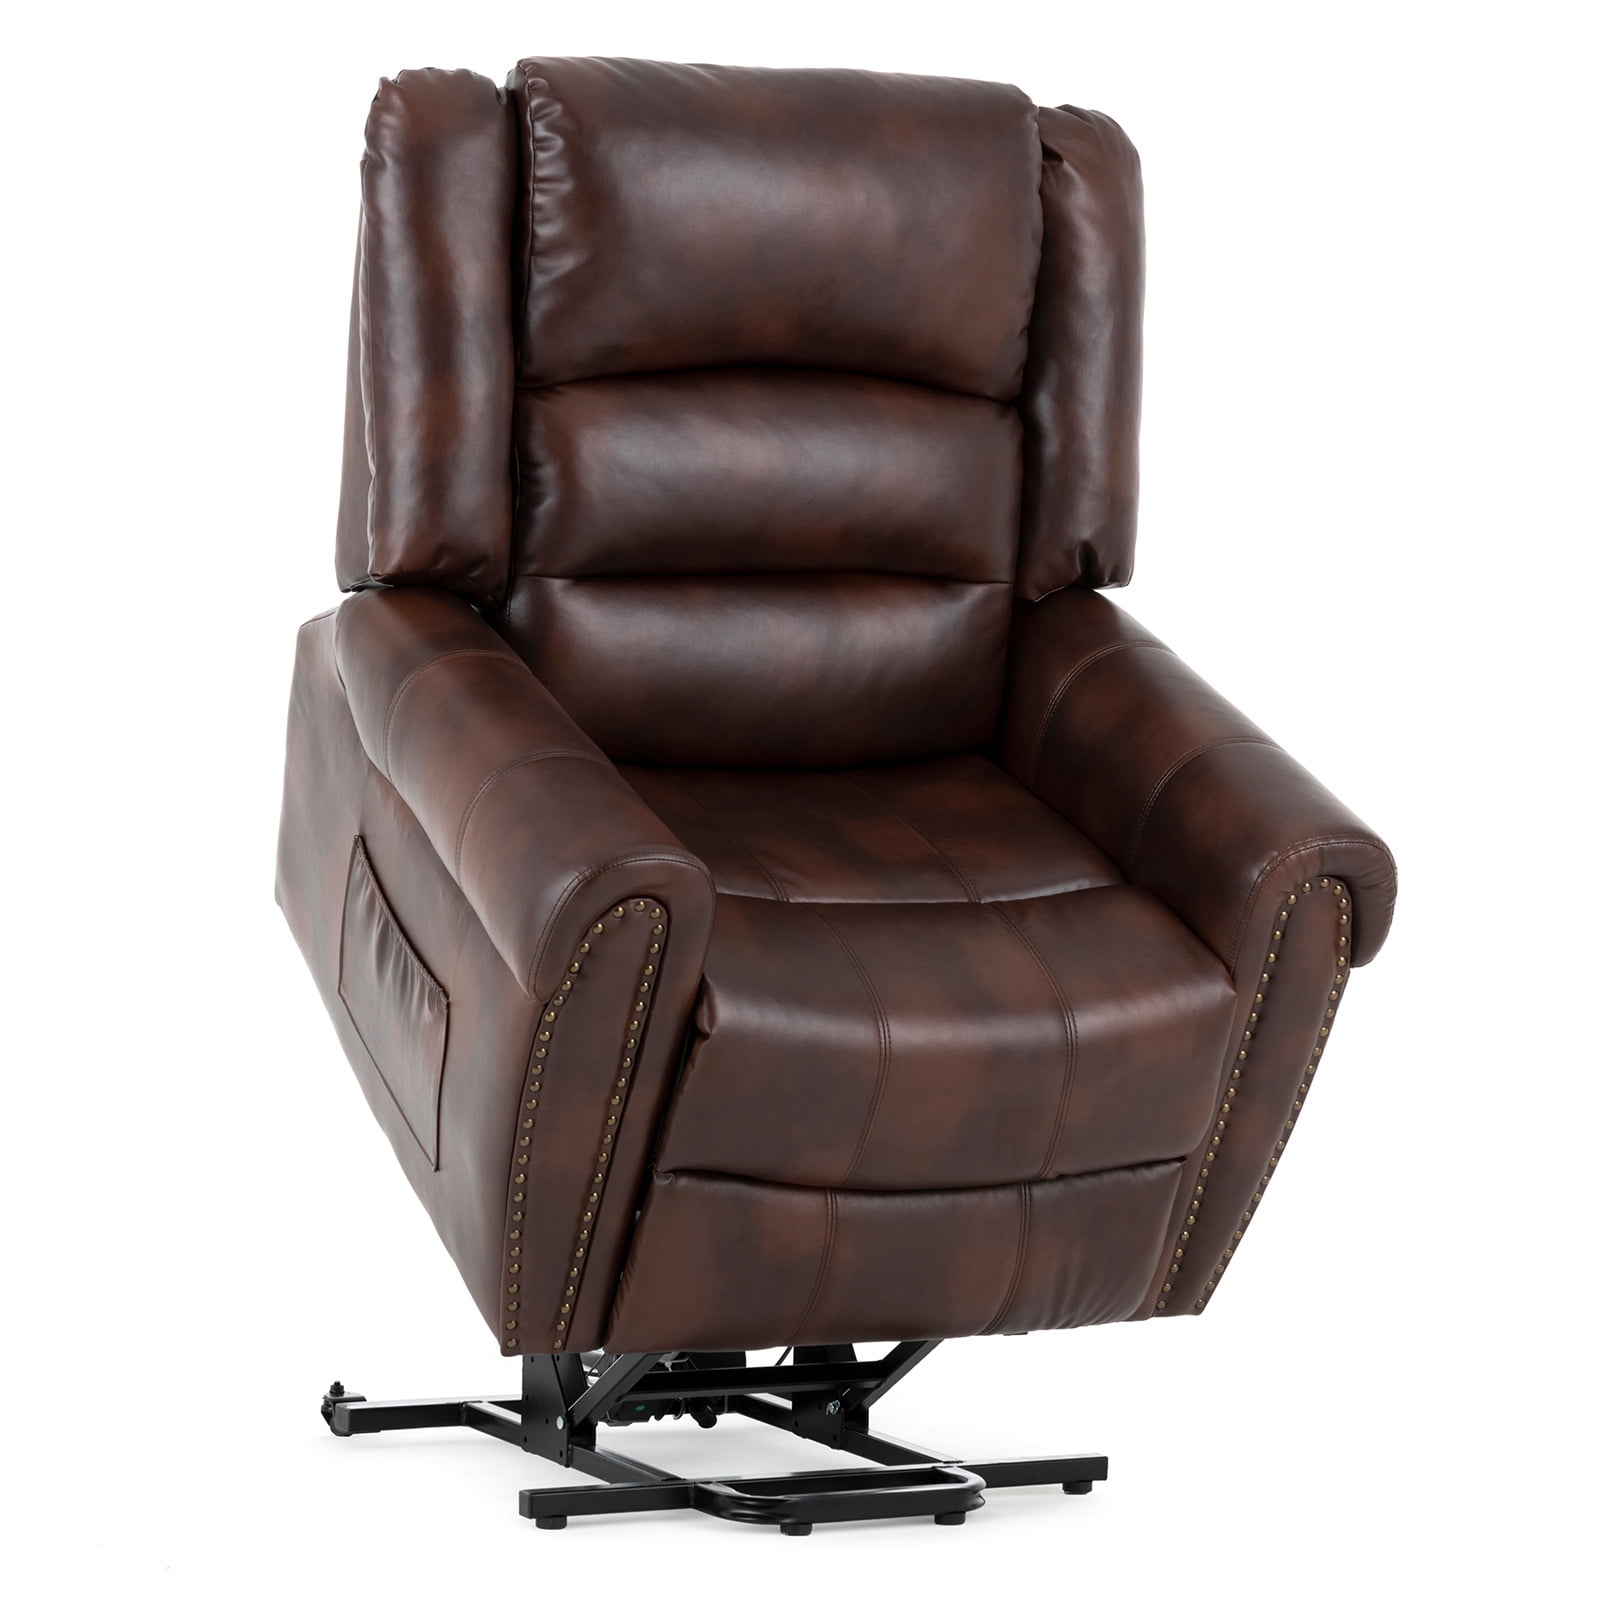 Mecor Lift Chairs Recliners Lift Chair For Elderly Reclining Lift Chairs With Dual Motor Pu Leather Sleeper Recliner Chair With Massage Heat Vibration Remote Control For Living Room Dark Brown Walmart Com Walmart Com